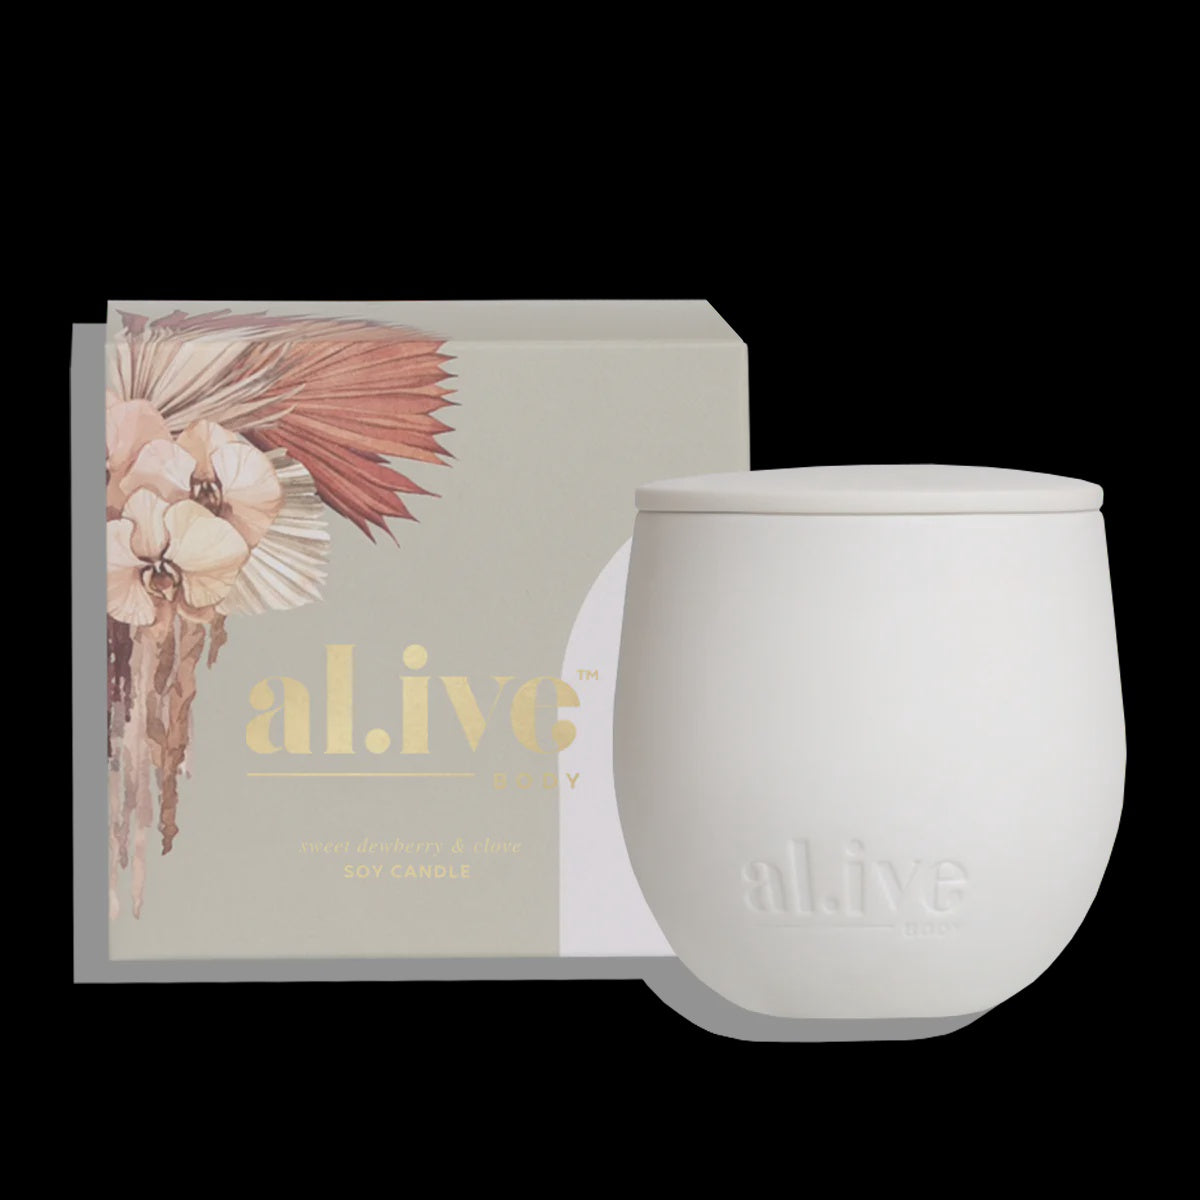 Al.Ive Body Sweet Dewberry & Clove Soy Candle